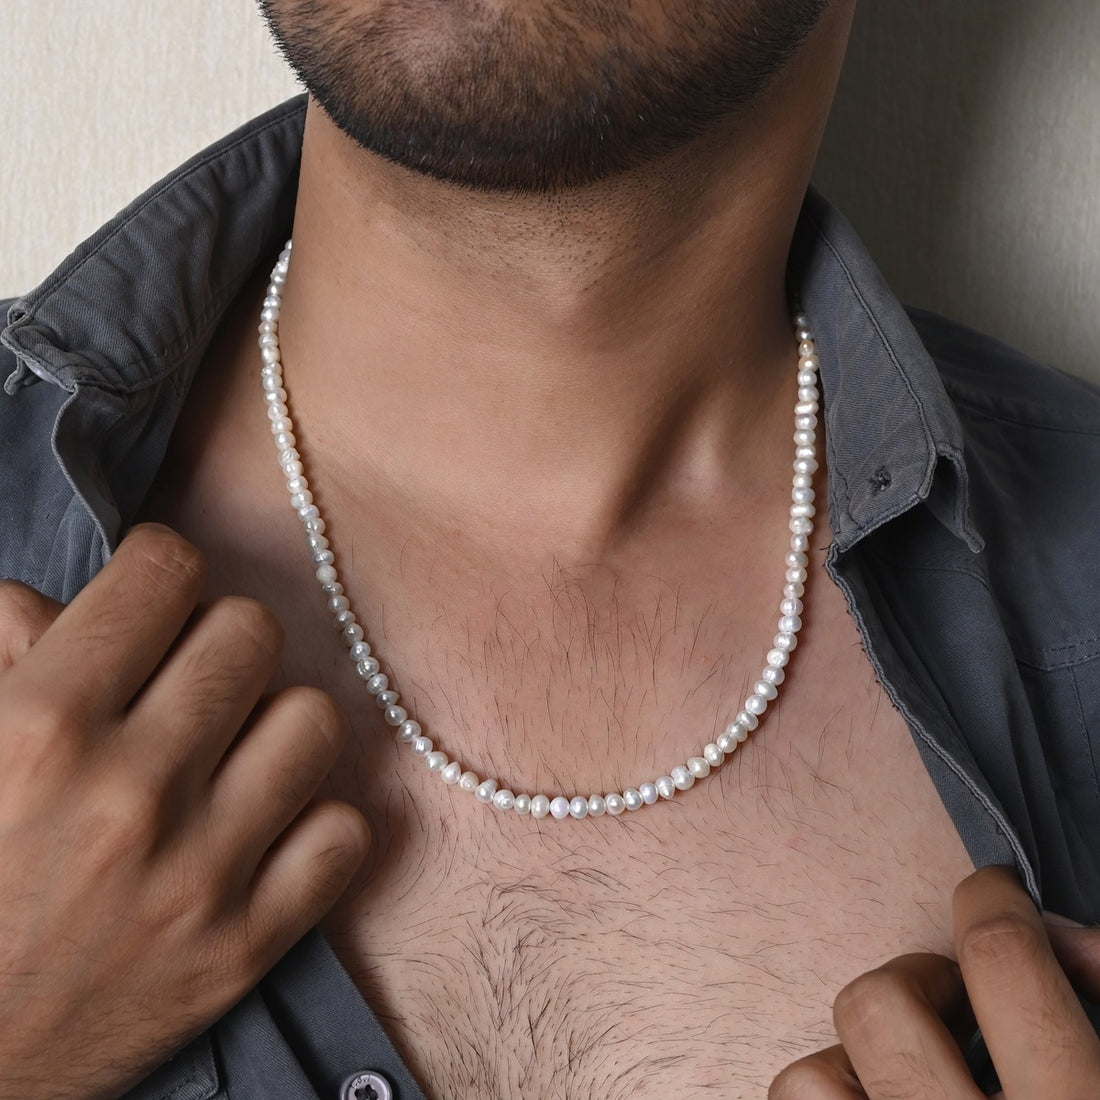 Men's Pearl Gemstone Silver Necklace: Formal elegance for special occasions